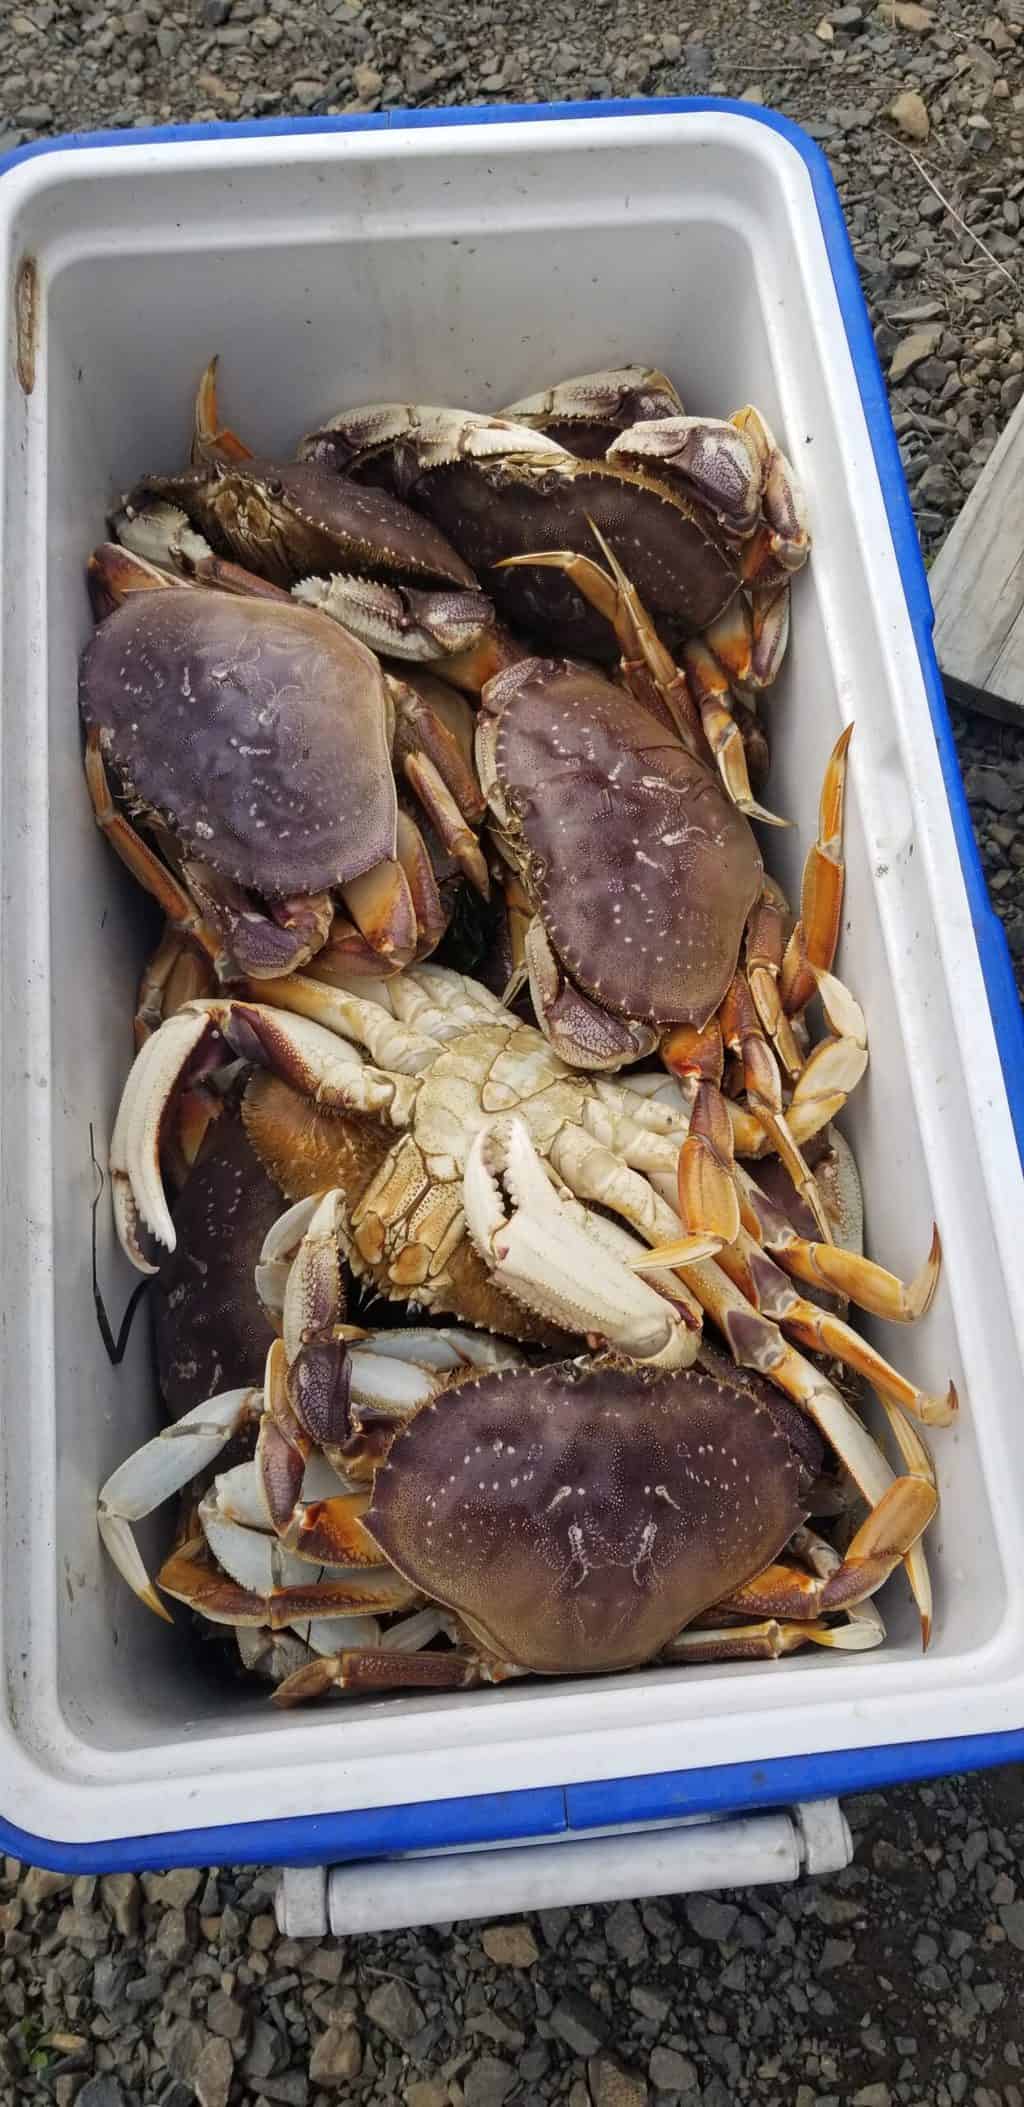 A cooler full of fresh crabs caught in one of the best crabbing bays in oregon.